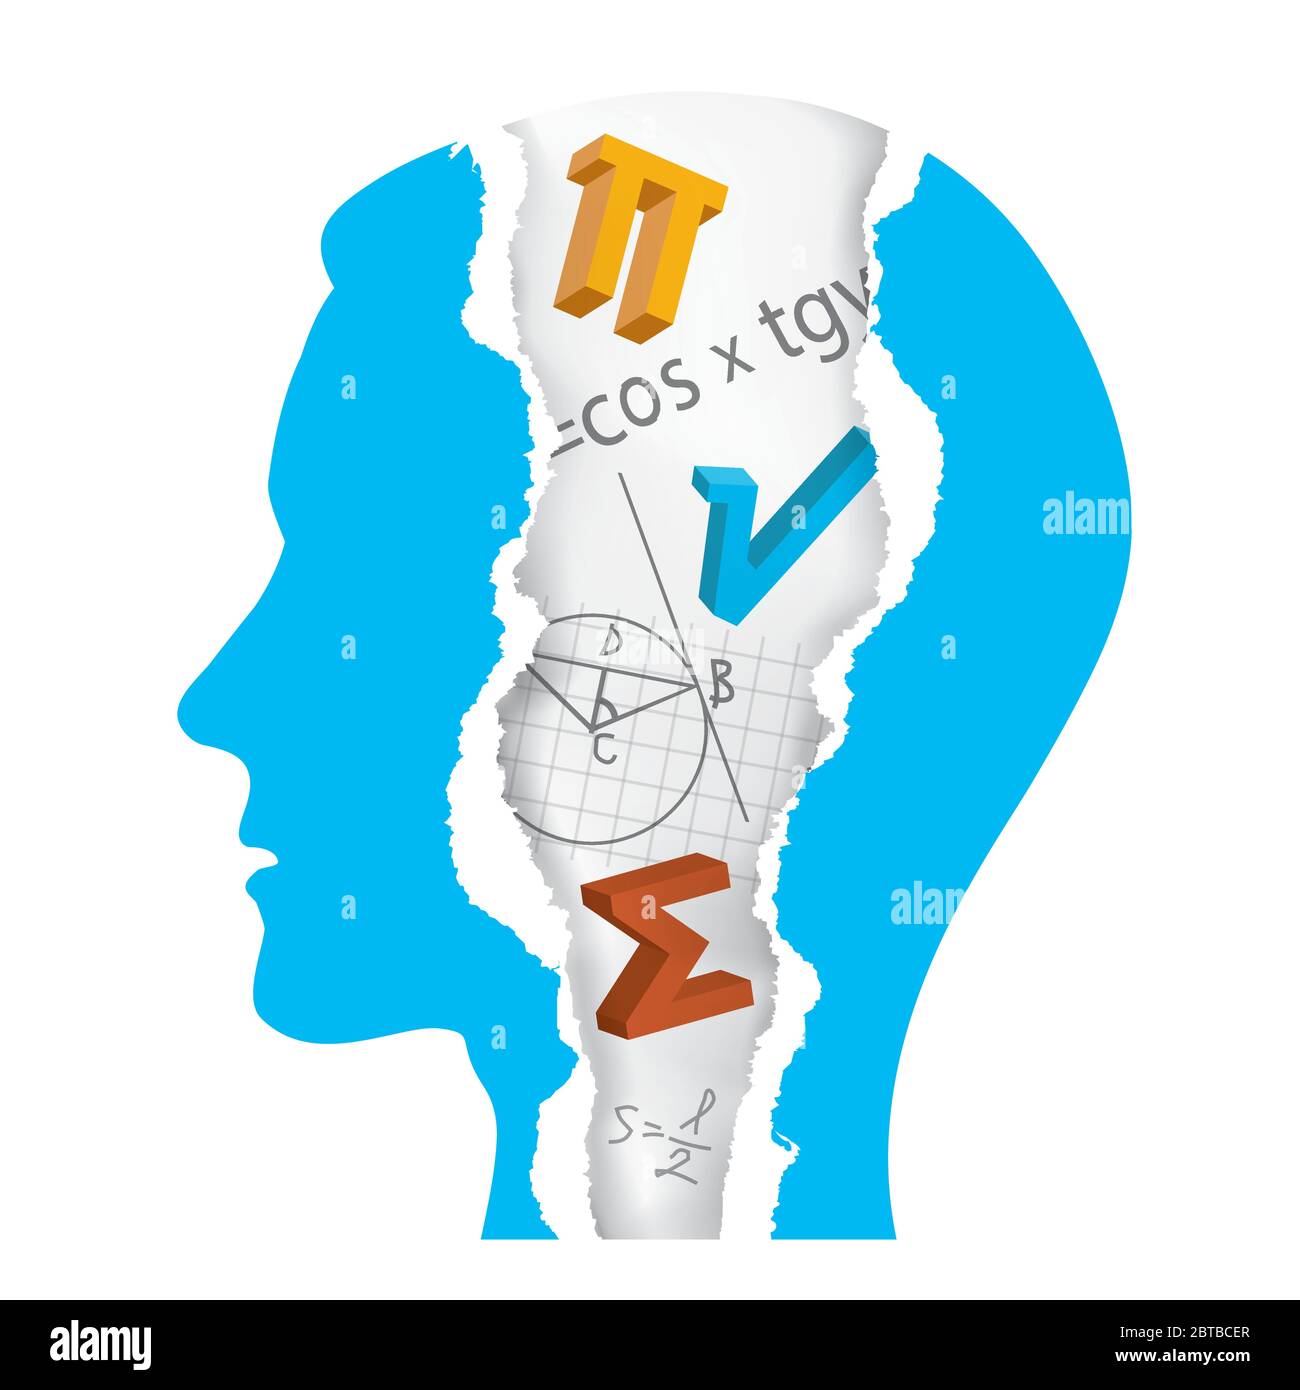 Student of Mathematics silhouette, ripped paper, education concept. Torn paper stylized male head with ripped paper fragments with mathematics symbols Stock Vector